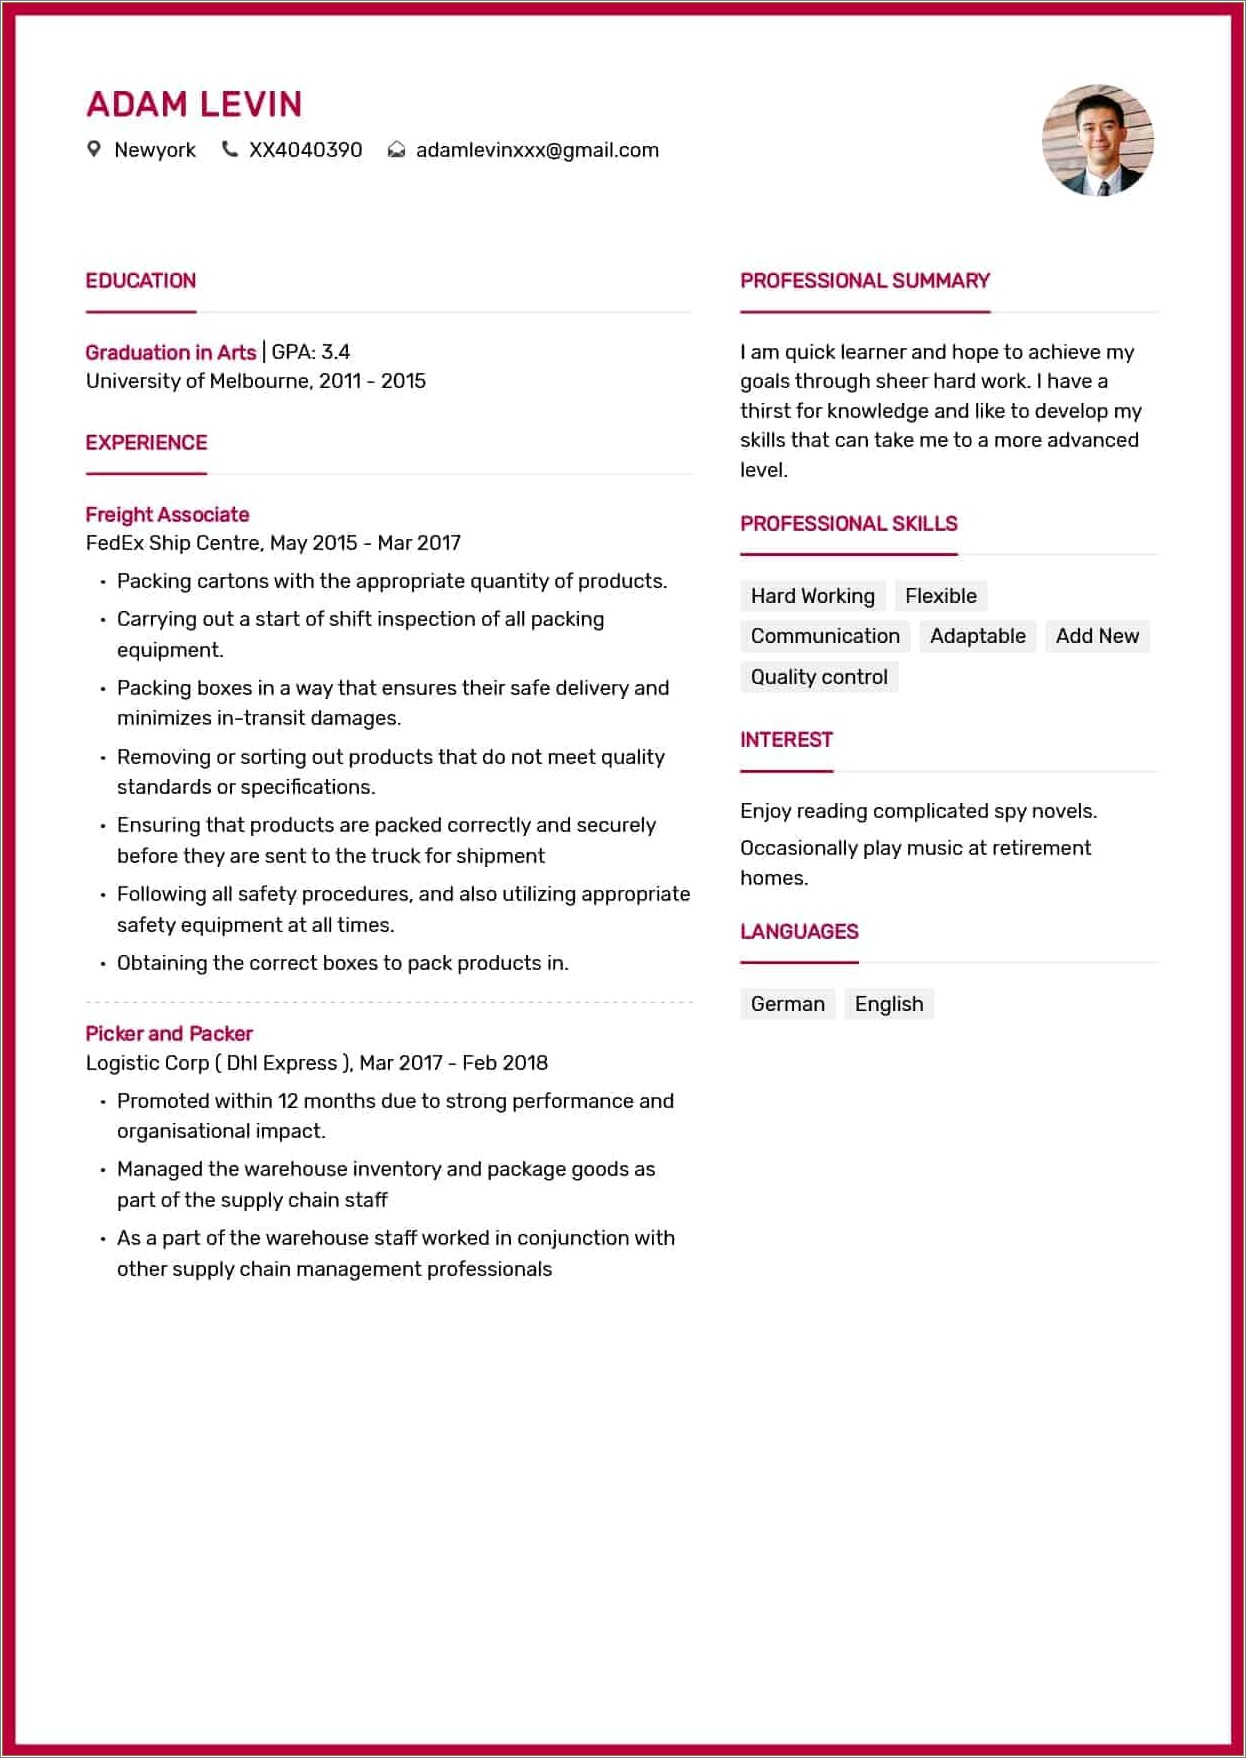 Sample Resume With Roles And Responsibilities